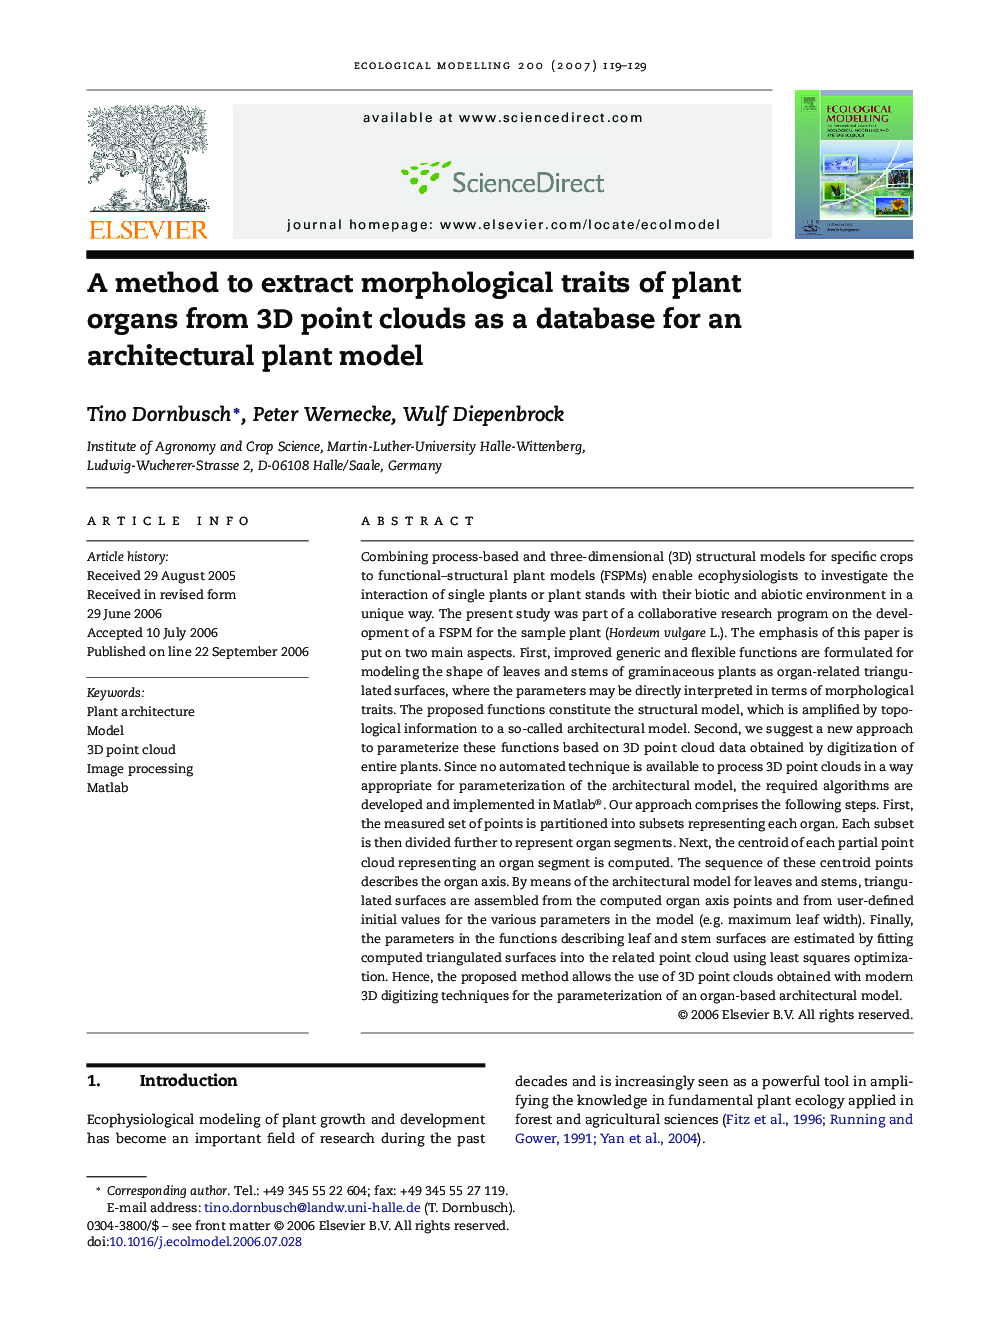 A method to extract morphological traits of plant organs from 3D point clouds as a database for an architectural plant model